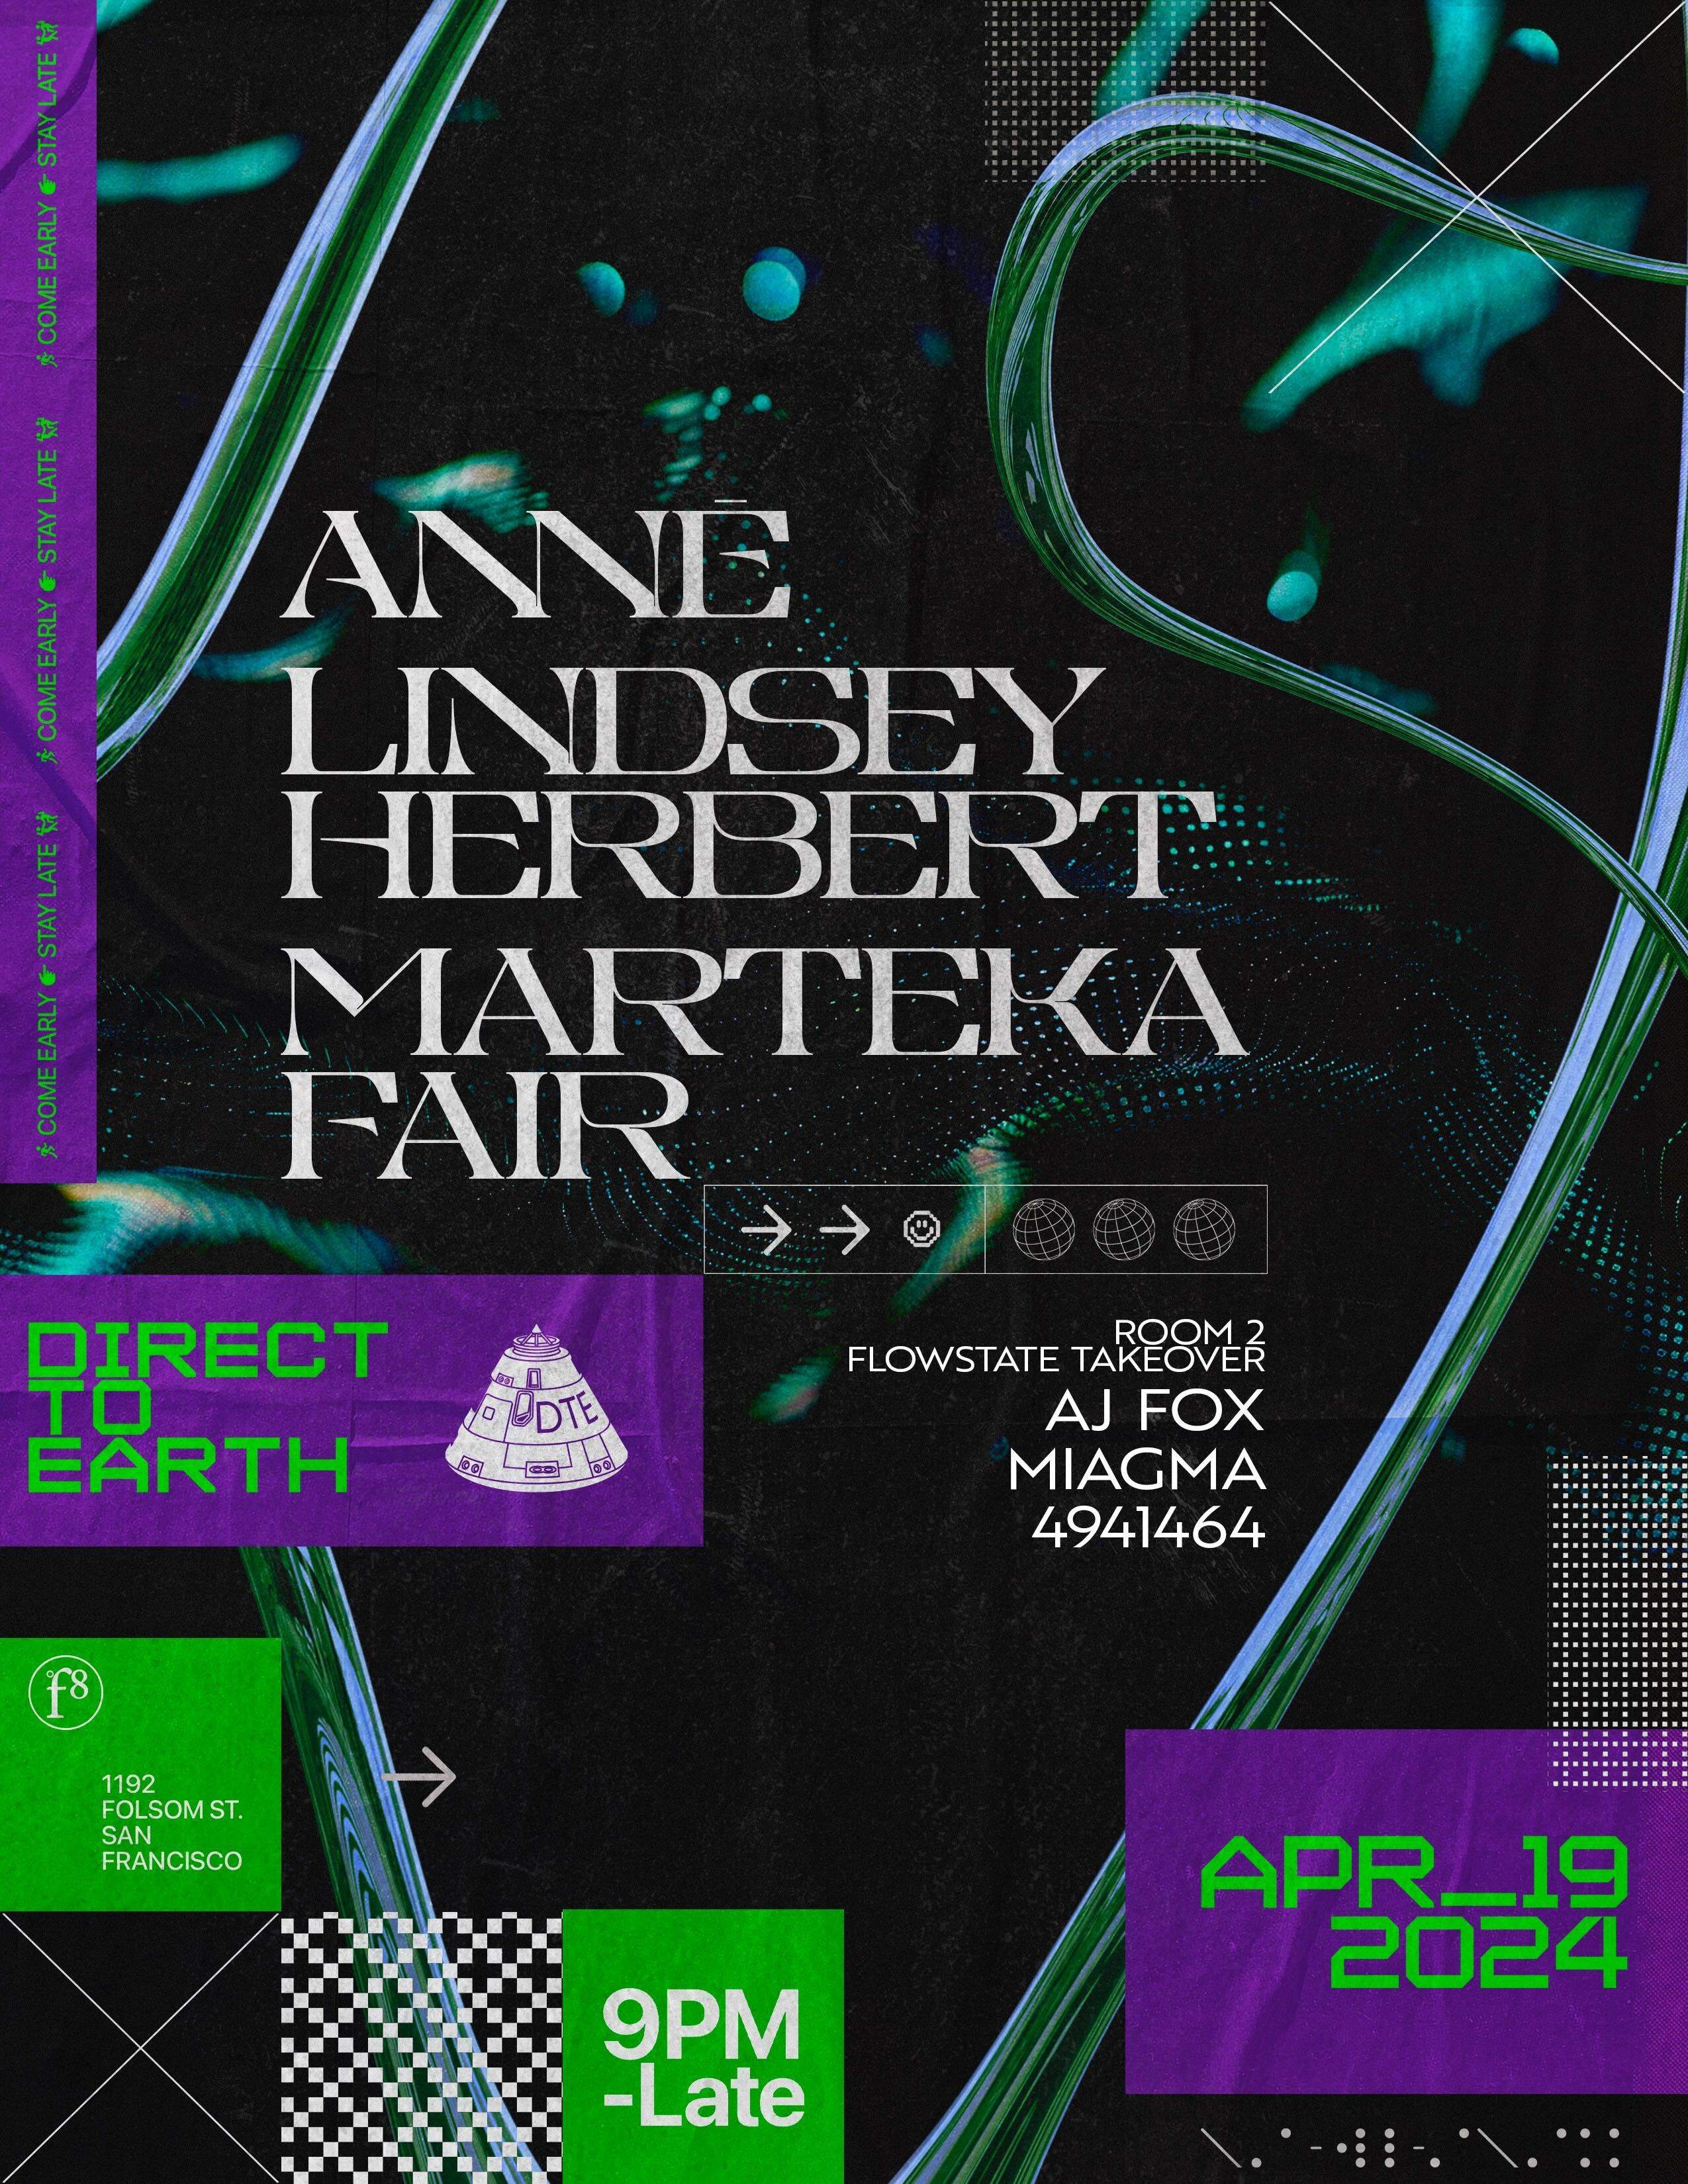 Direct to Earth with ANNĒ (SF Debut), Lindsey Herbert, Marteka Fair and Flowstate - フライヤー表